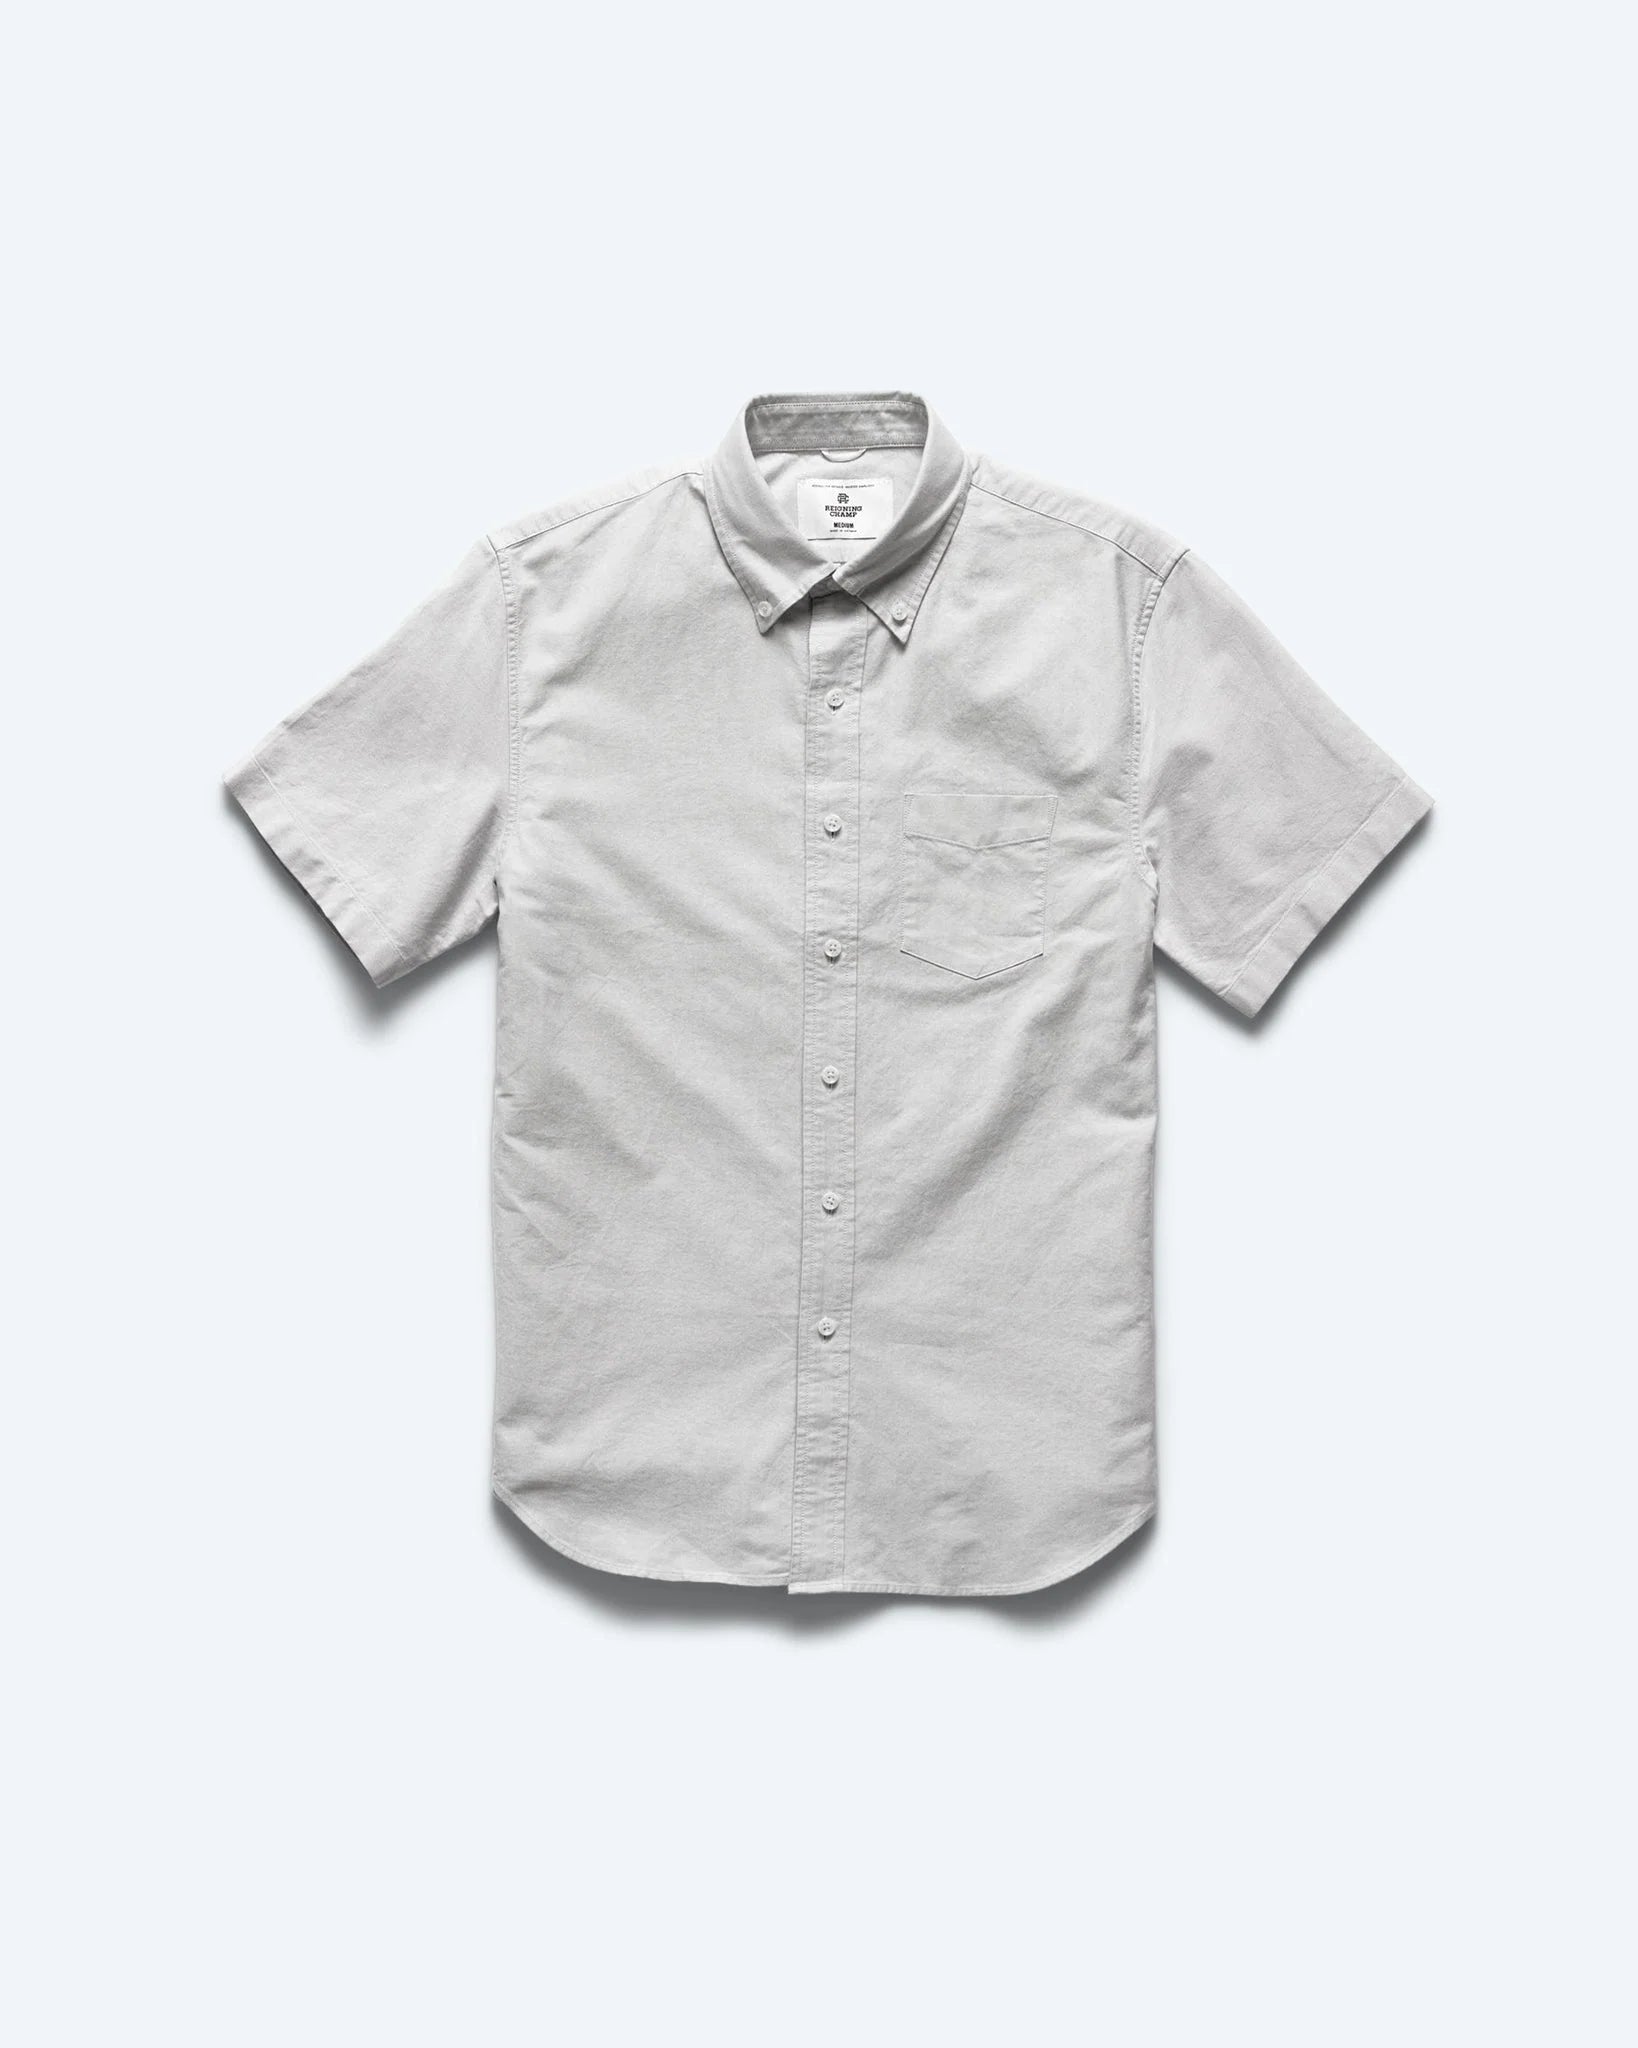 Reigning Champ Windsor S/S Oxford Shirt in Light Grey